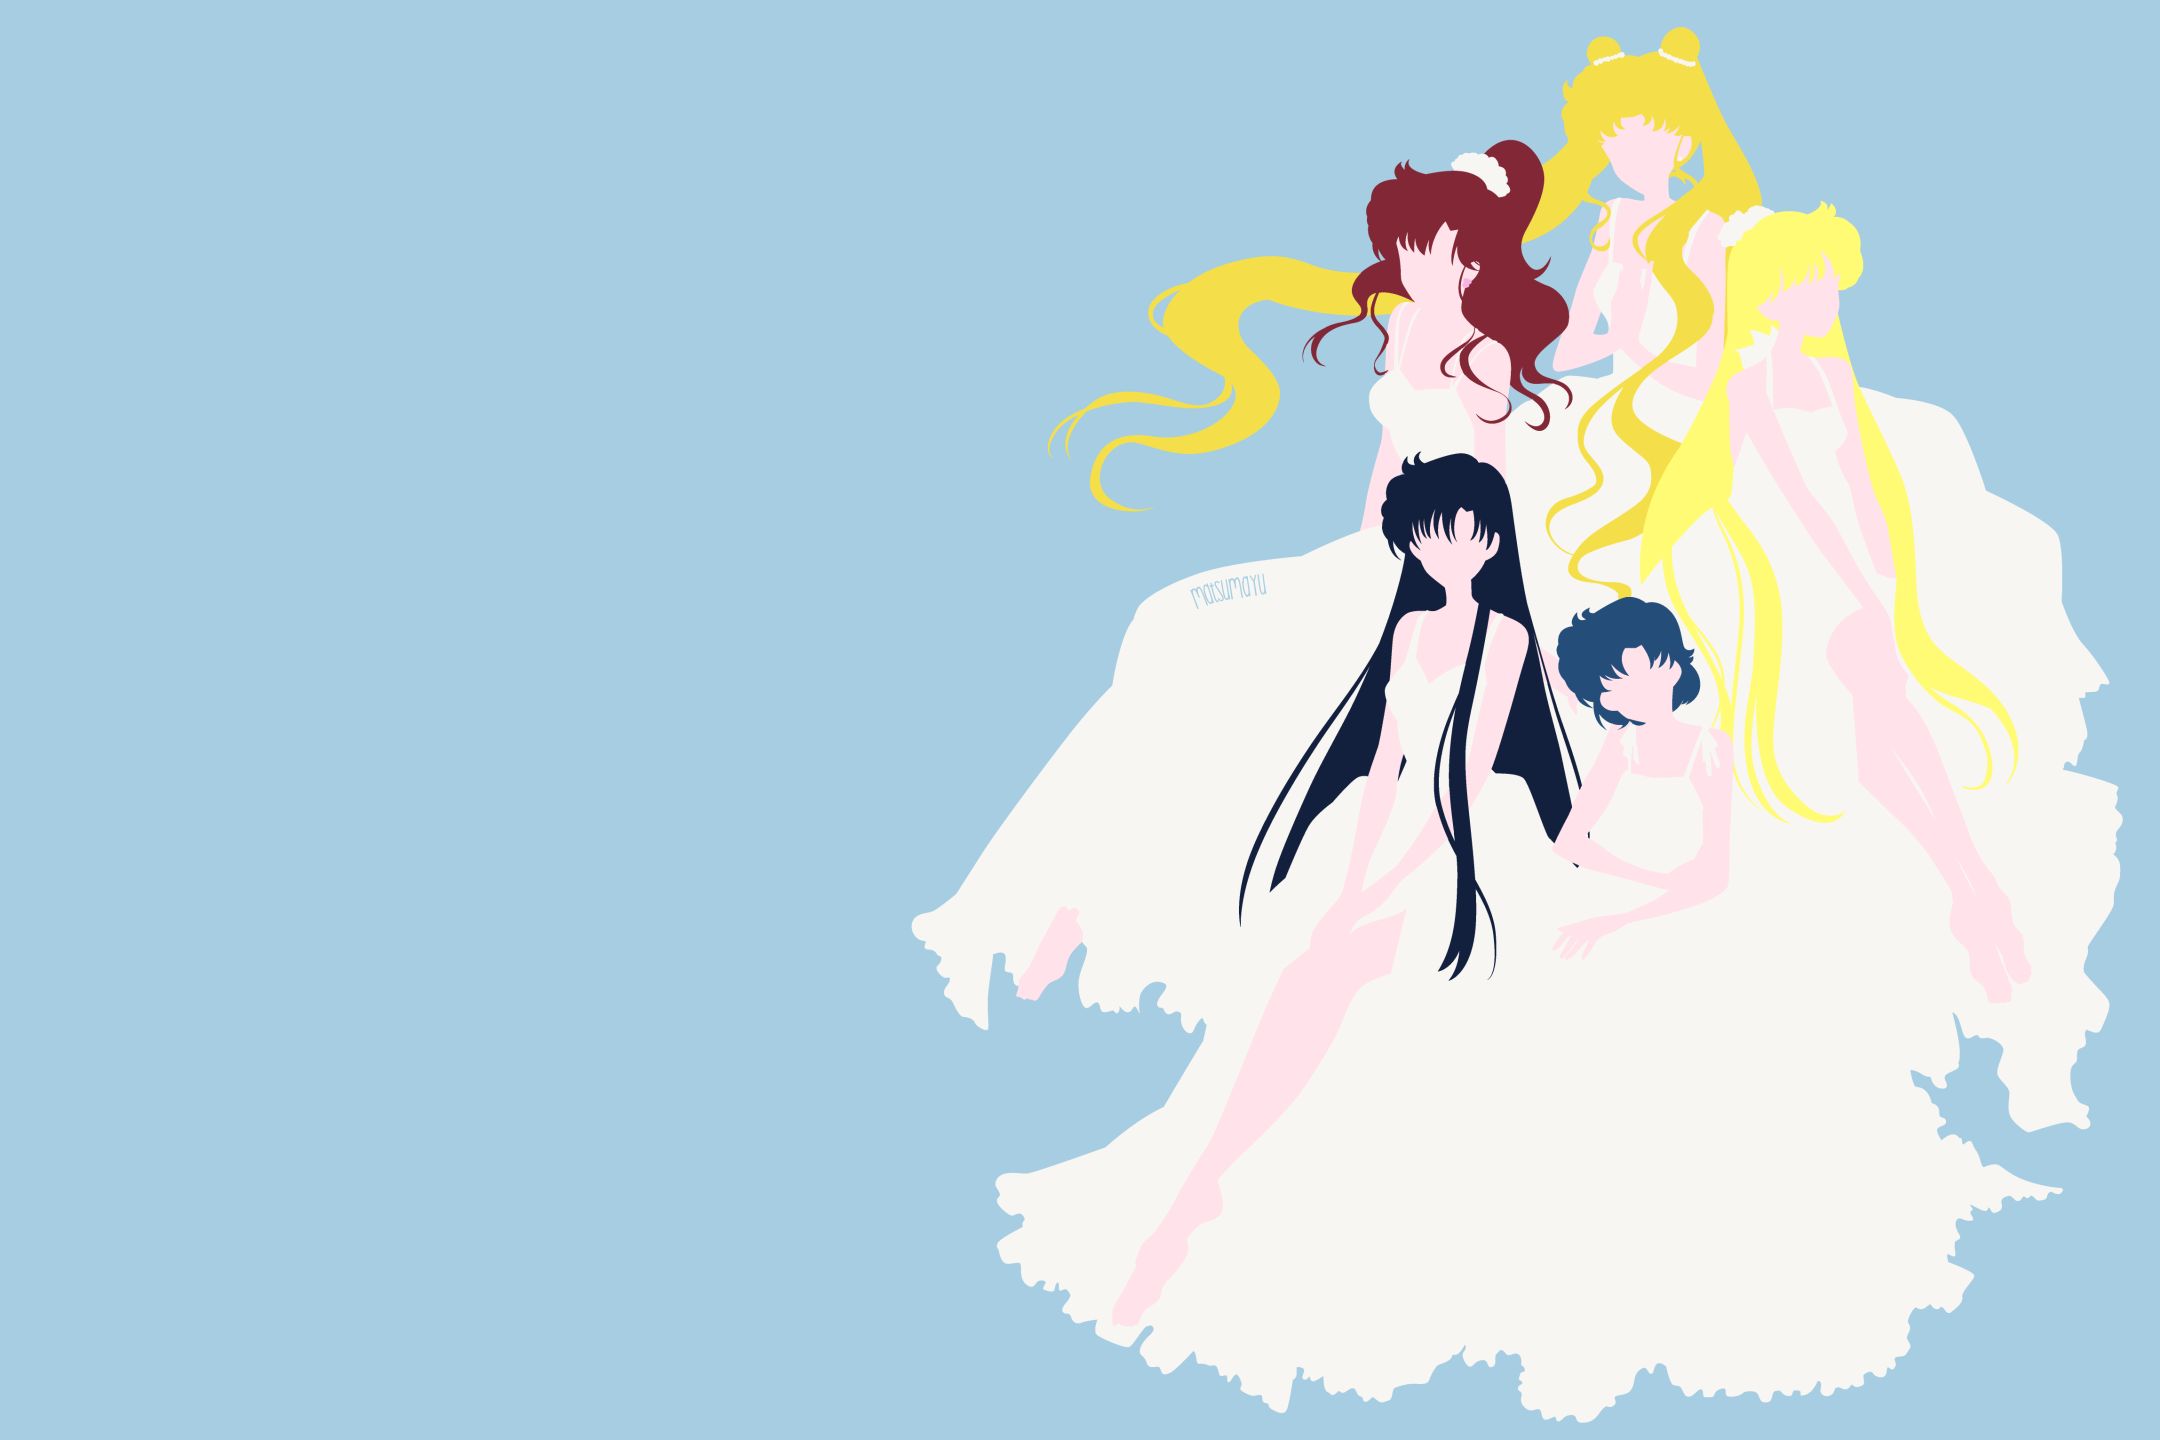 Download Sailor Moon Crystal wallpaper for mobile phone, free Sailor Moon Crystal HD picture